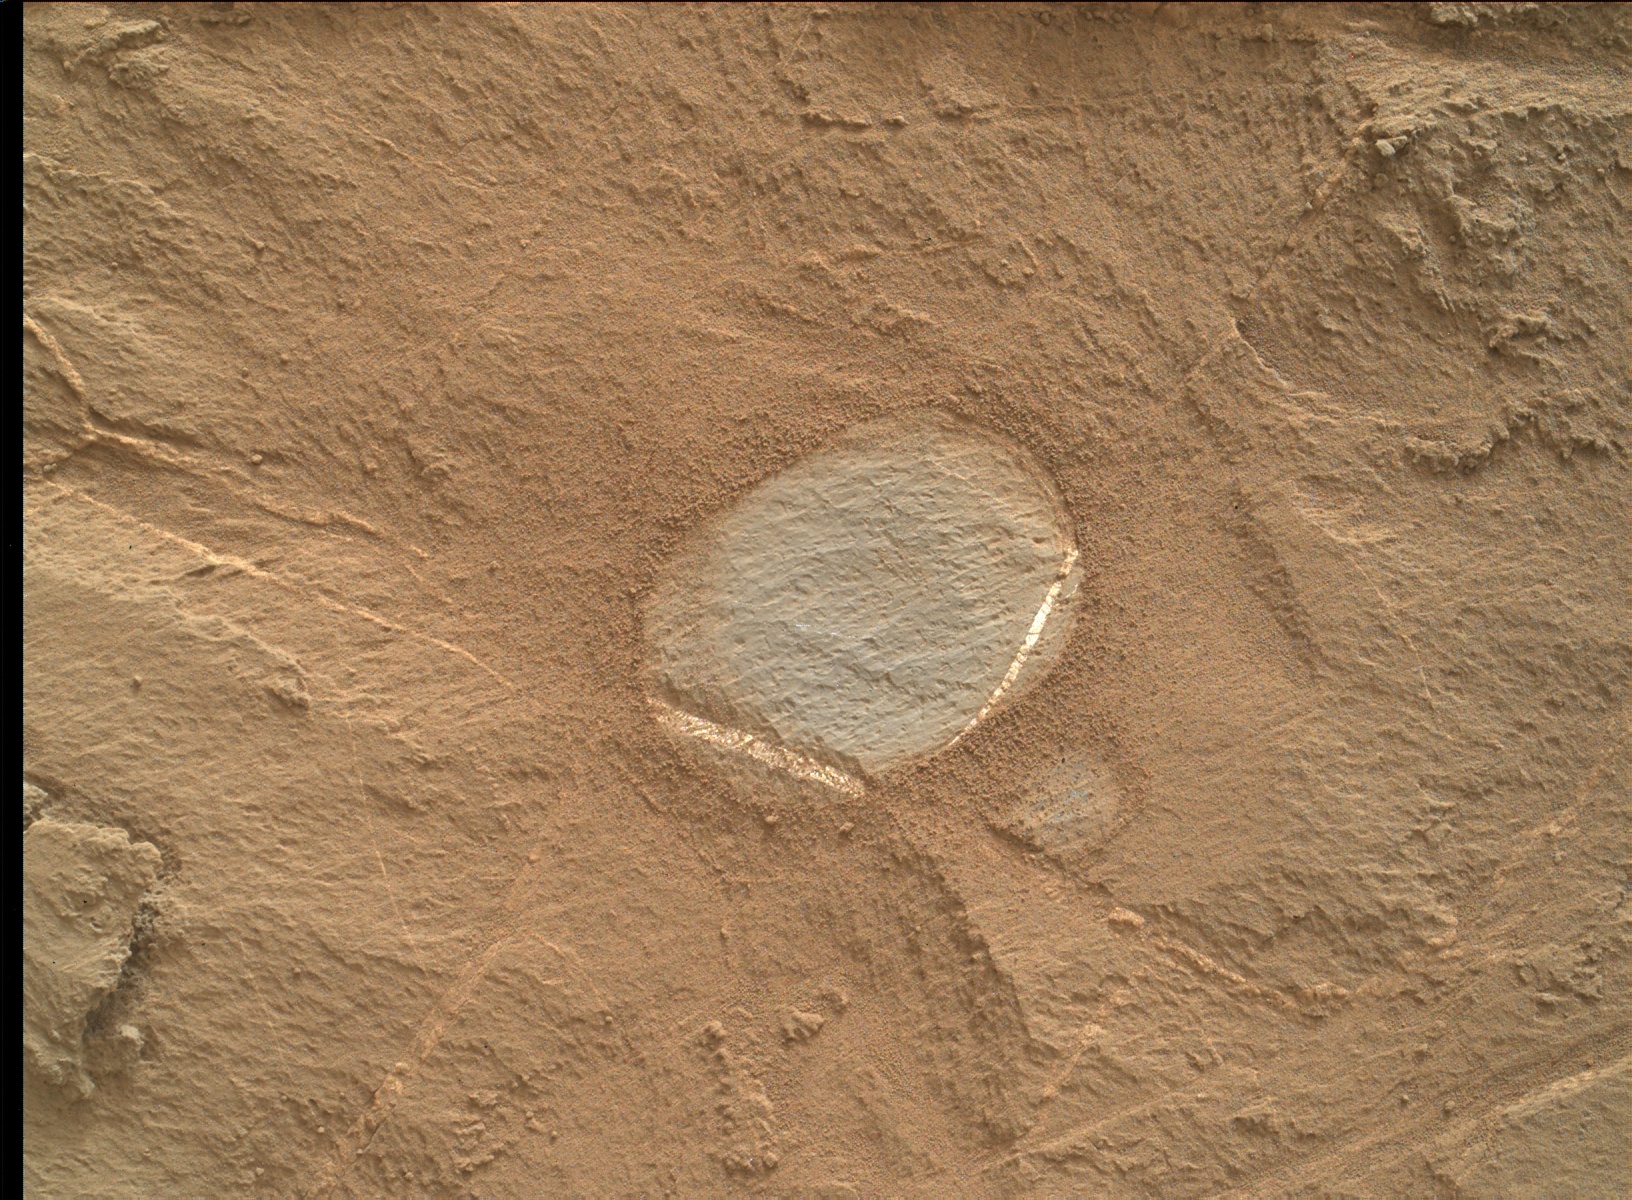 Nasa's Mars rover Curiosity acquired this image using its Mars Hand Lens Imager (MAHLI) on Sol 1358